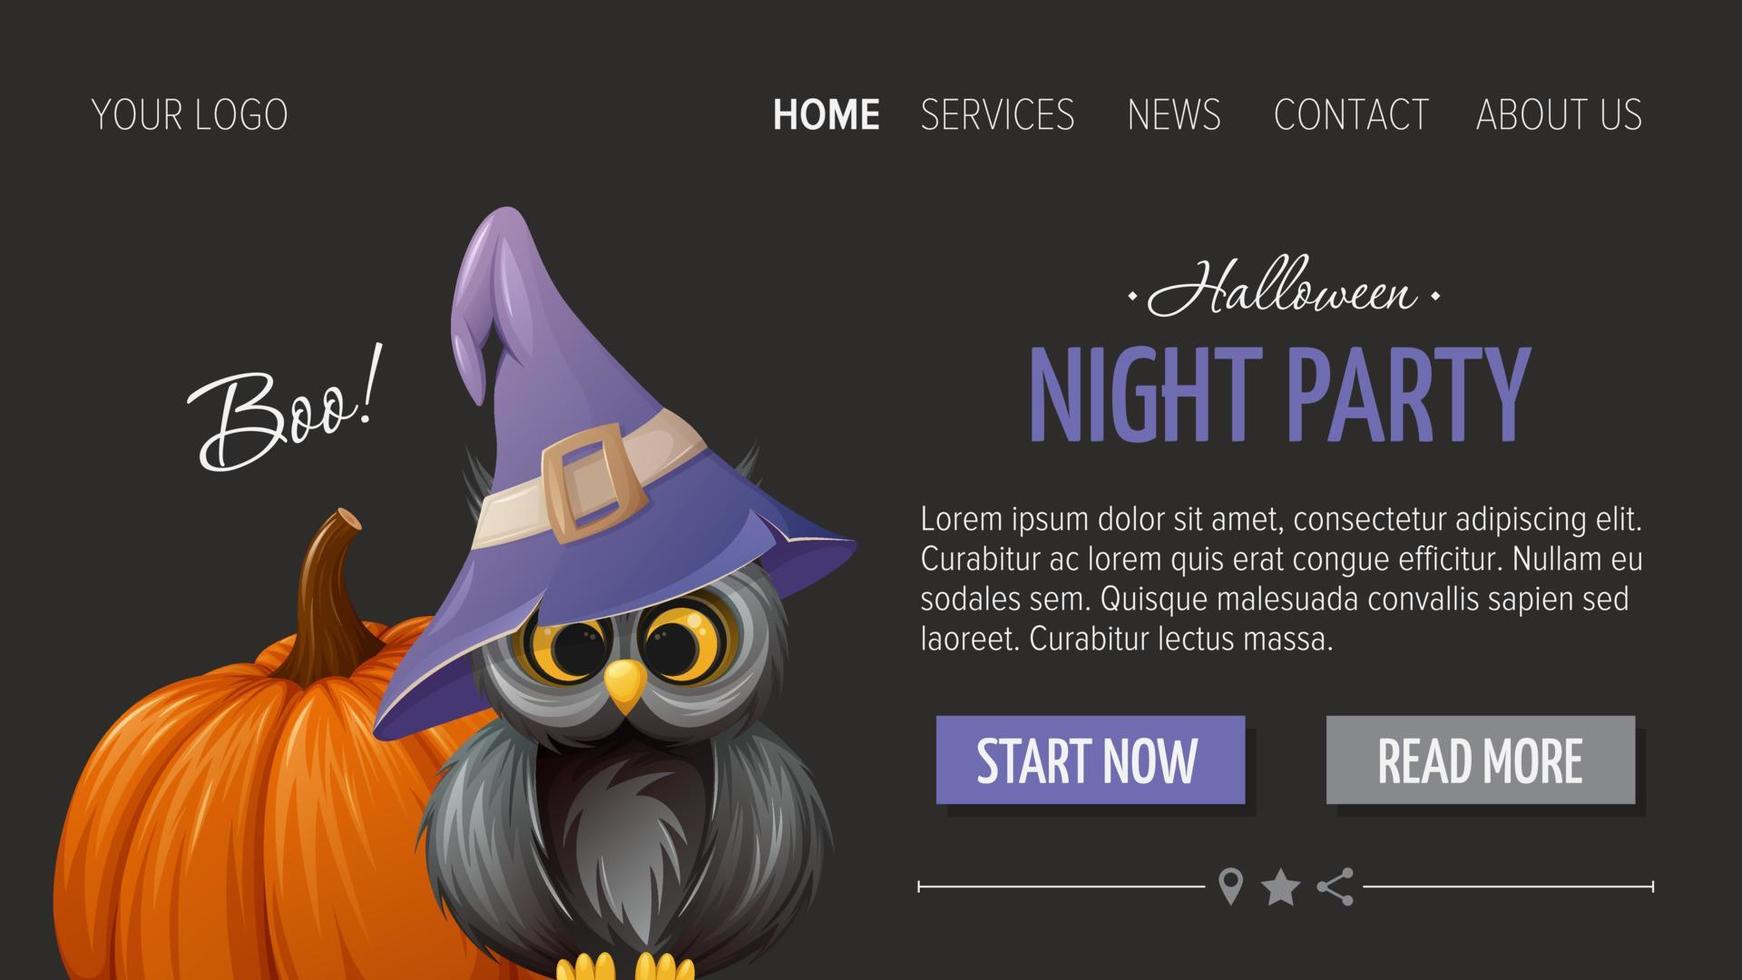 Cute owl in a sorcery hat and pumpkin. Night party. Halloween horizontal template for website, dark background. Vector illustration. For banner, store, sale